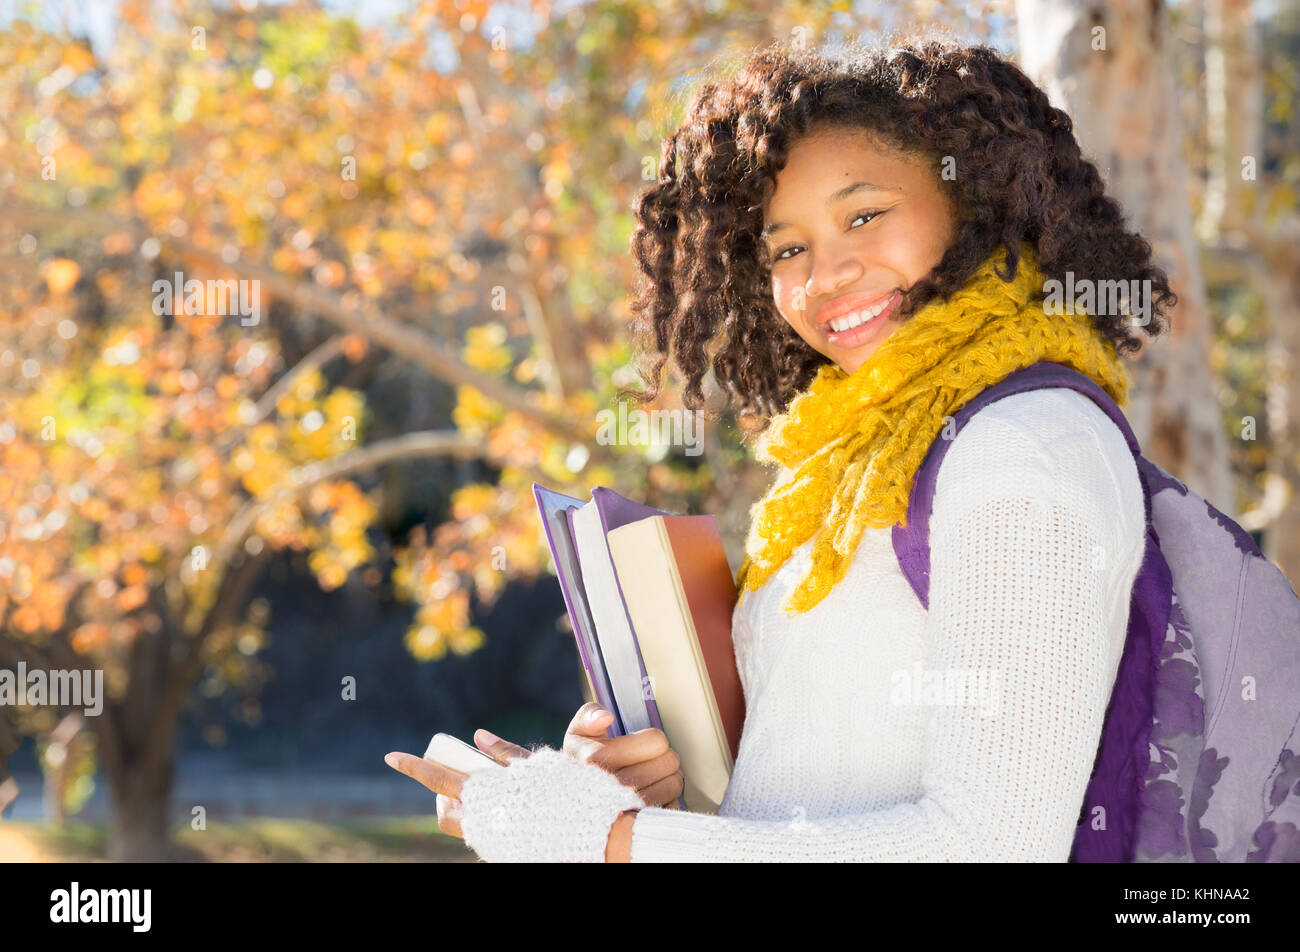 Attractive Black African American Student in Fall with Phone holding books while smiling at camera. Room for copy or text. Stock Photo